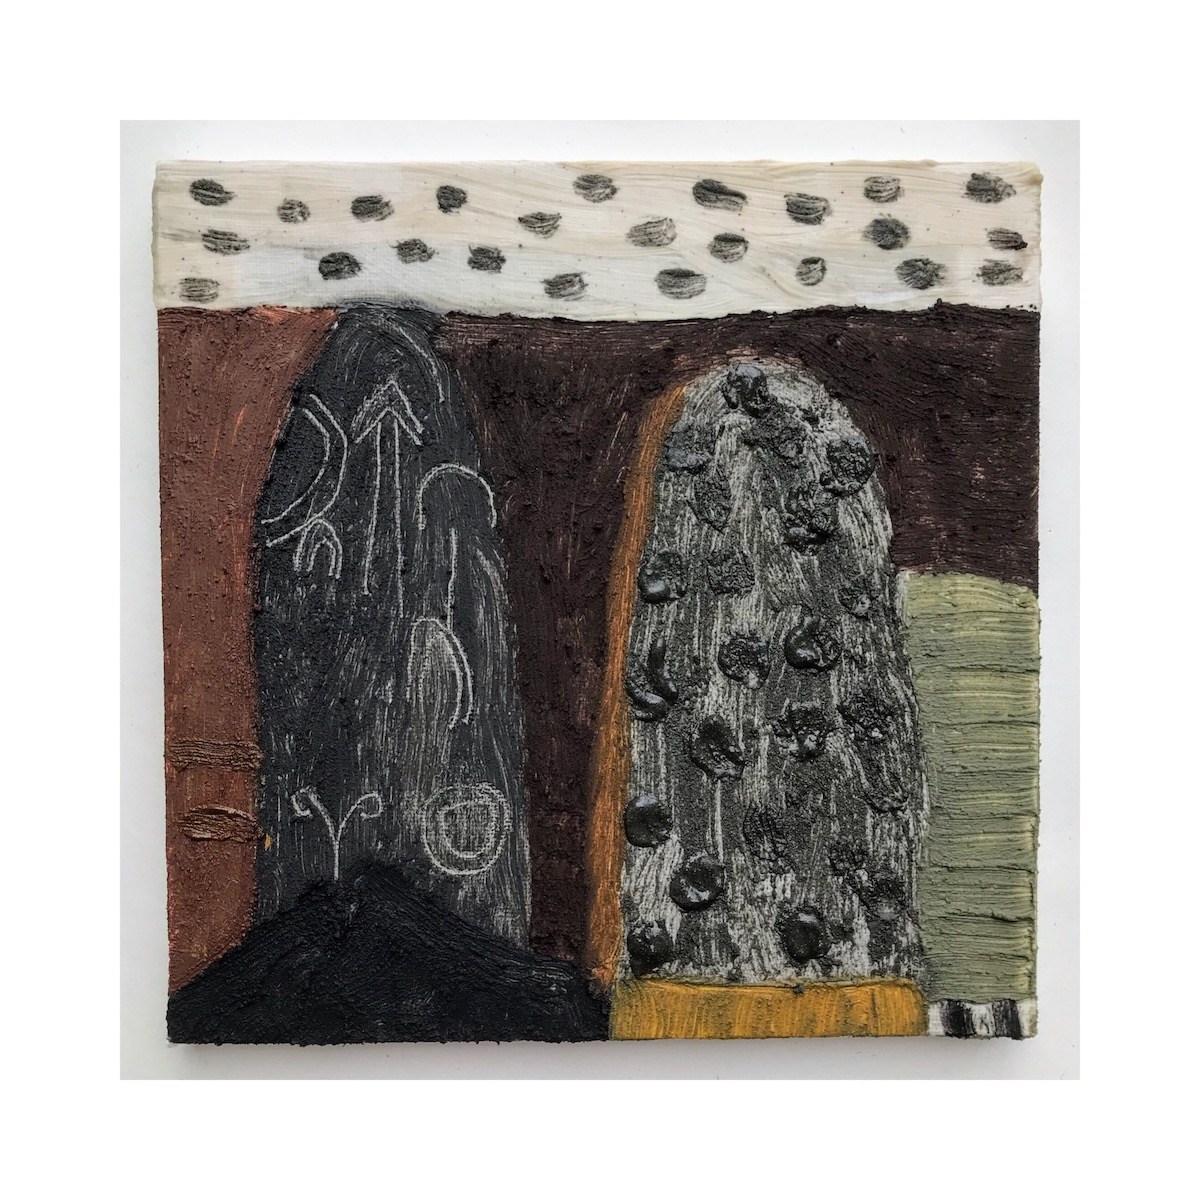 019 small colour study 2 - standing stones (Cornish earth pigments and linseed oil on canvas; 20x20cm)